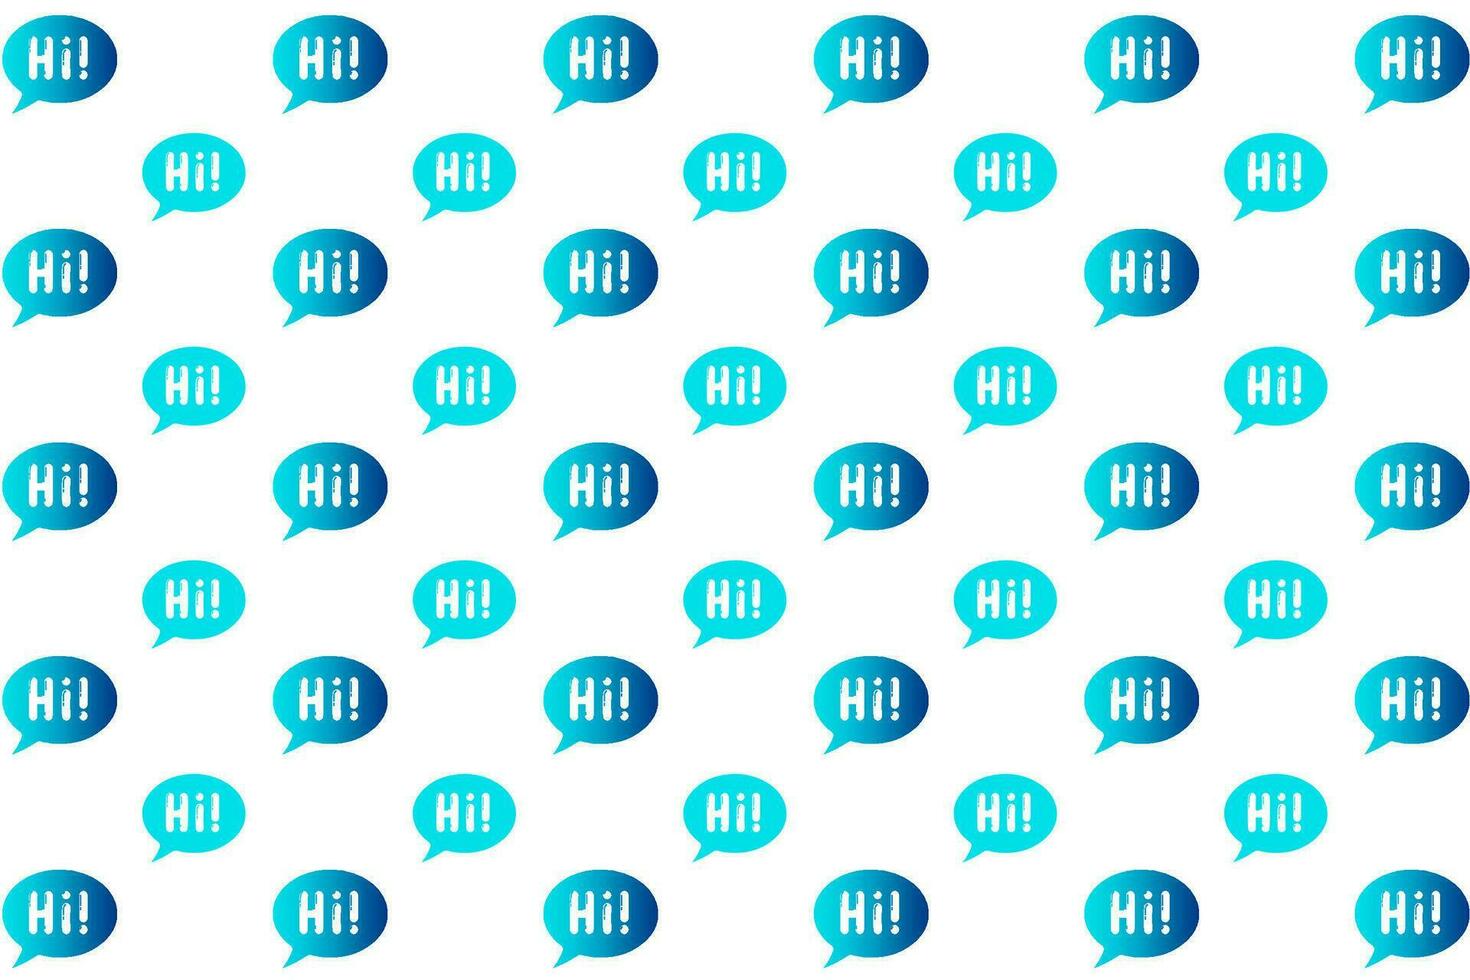 Abstract Hi Message Pattern Background vector